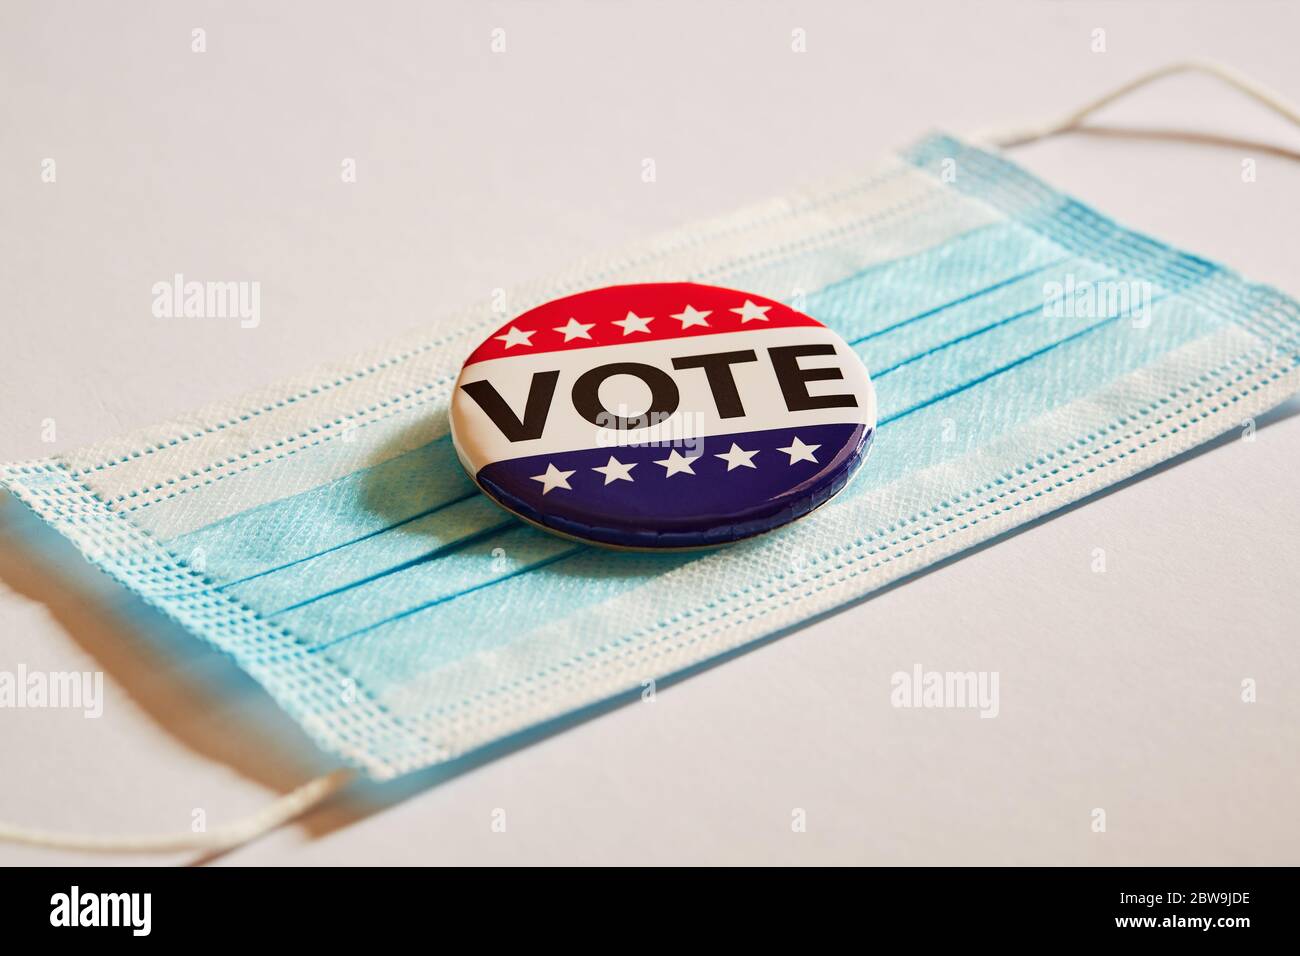 Vote pin on surgical mask Stock Photo